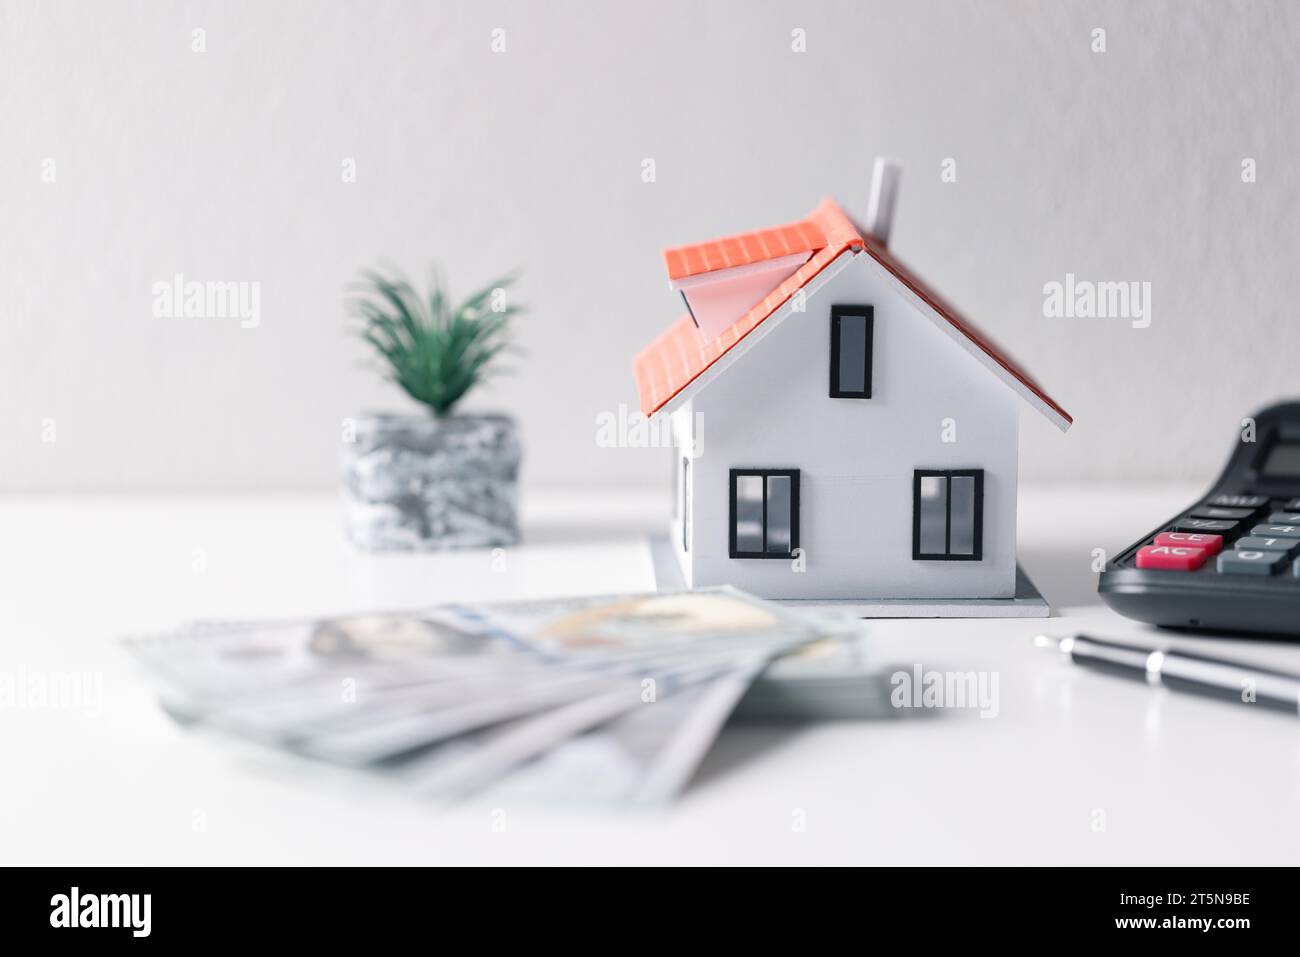 House with money. Concept of finance or refinance real estate. Symbol of house stands against background of us dollars. Property investment. Home mort Stock Photo